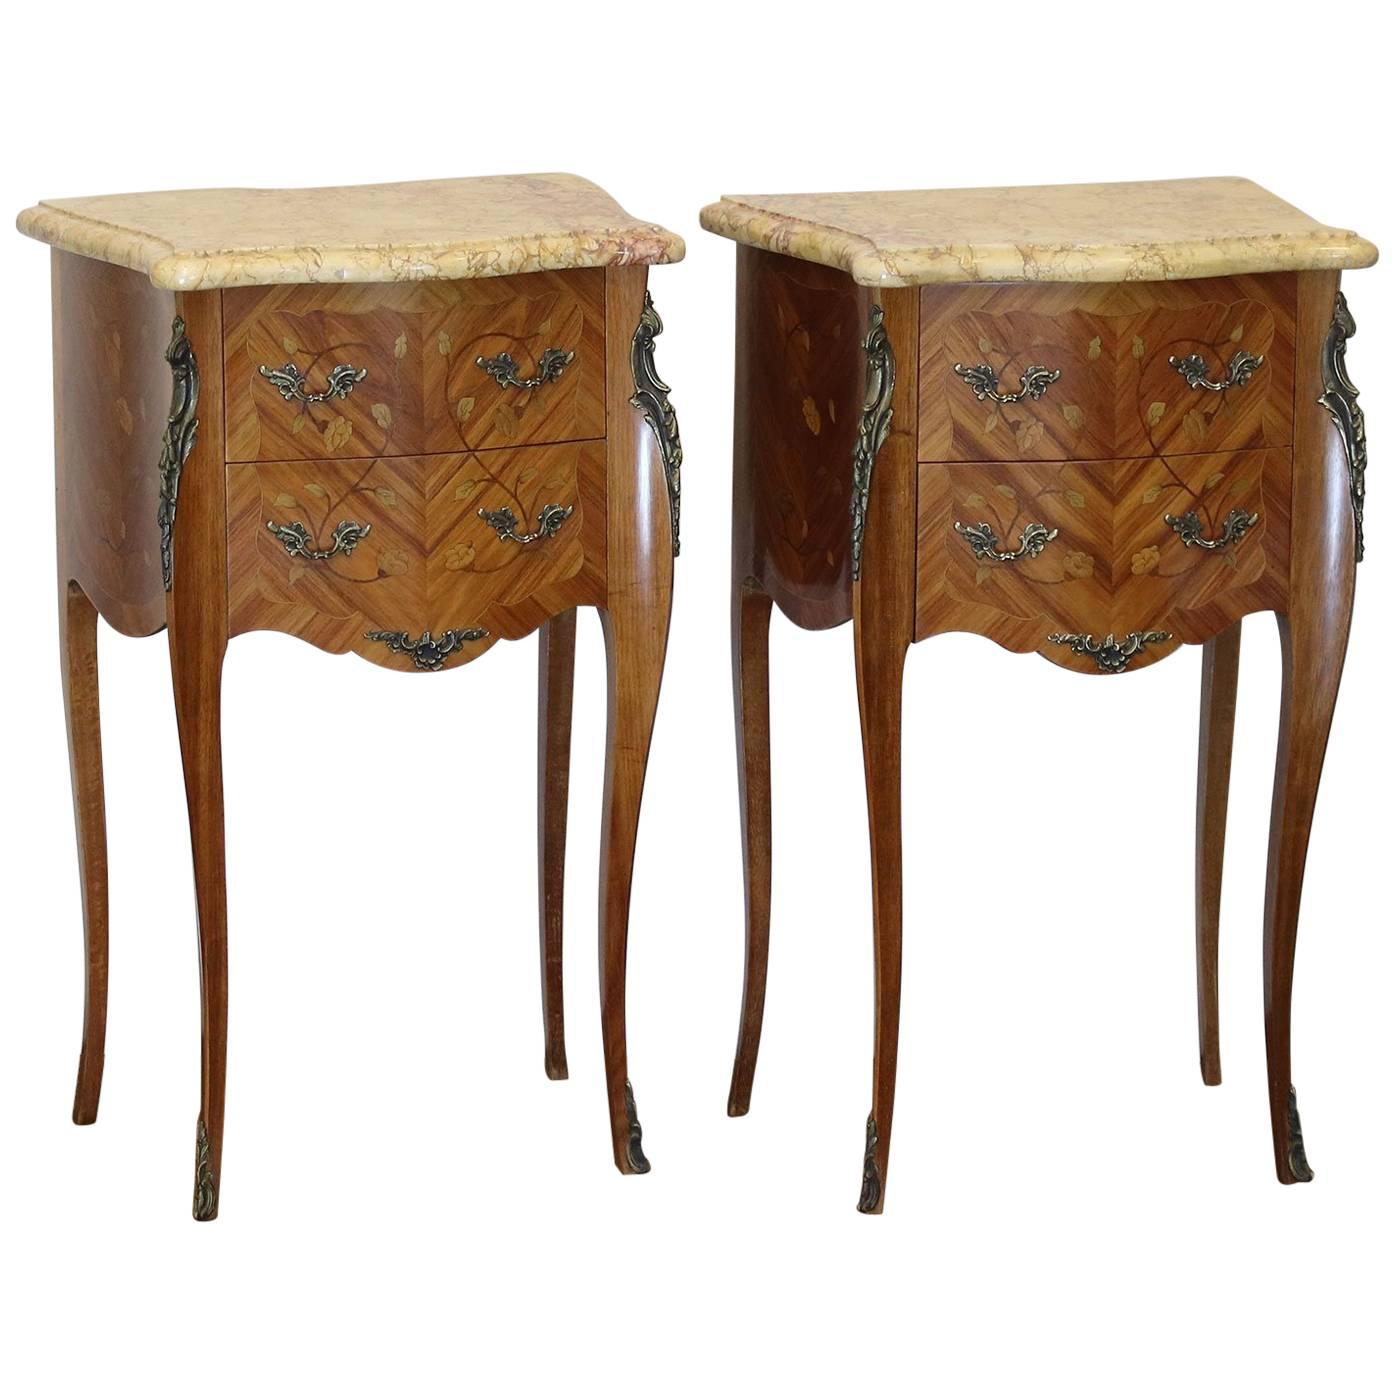 Matching Pair of Bedside Tables - PBT1